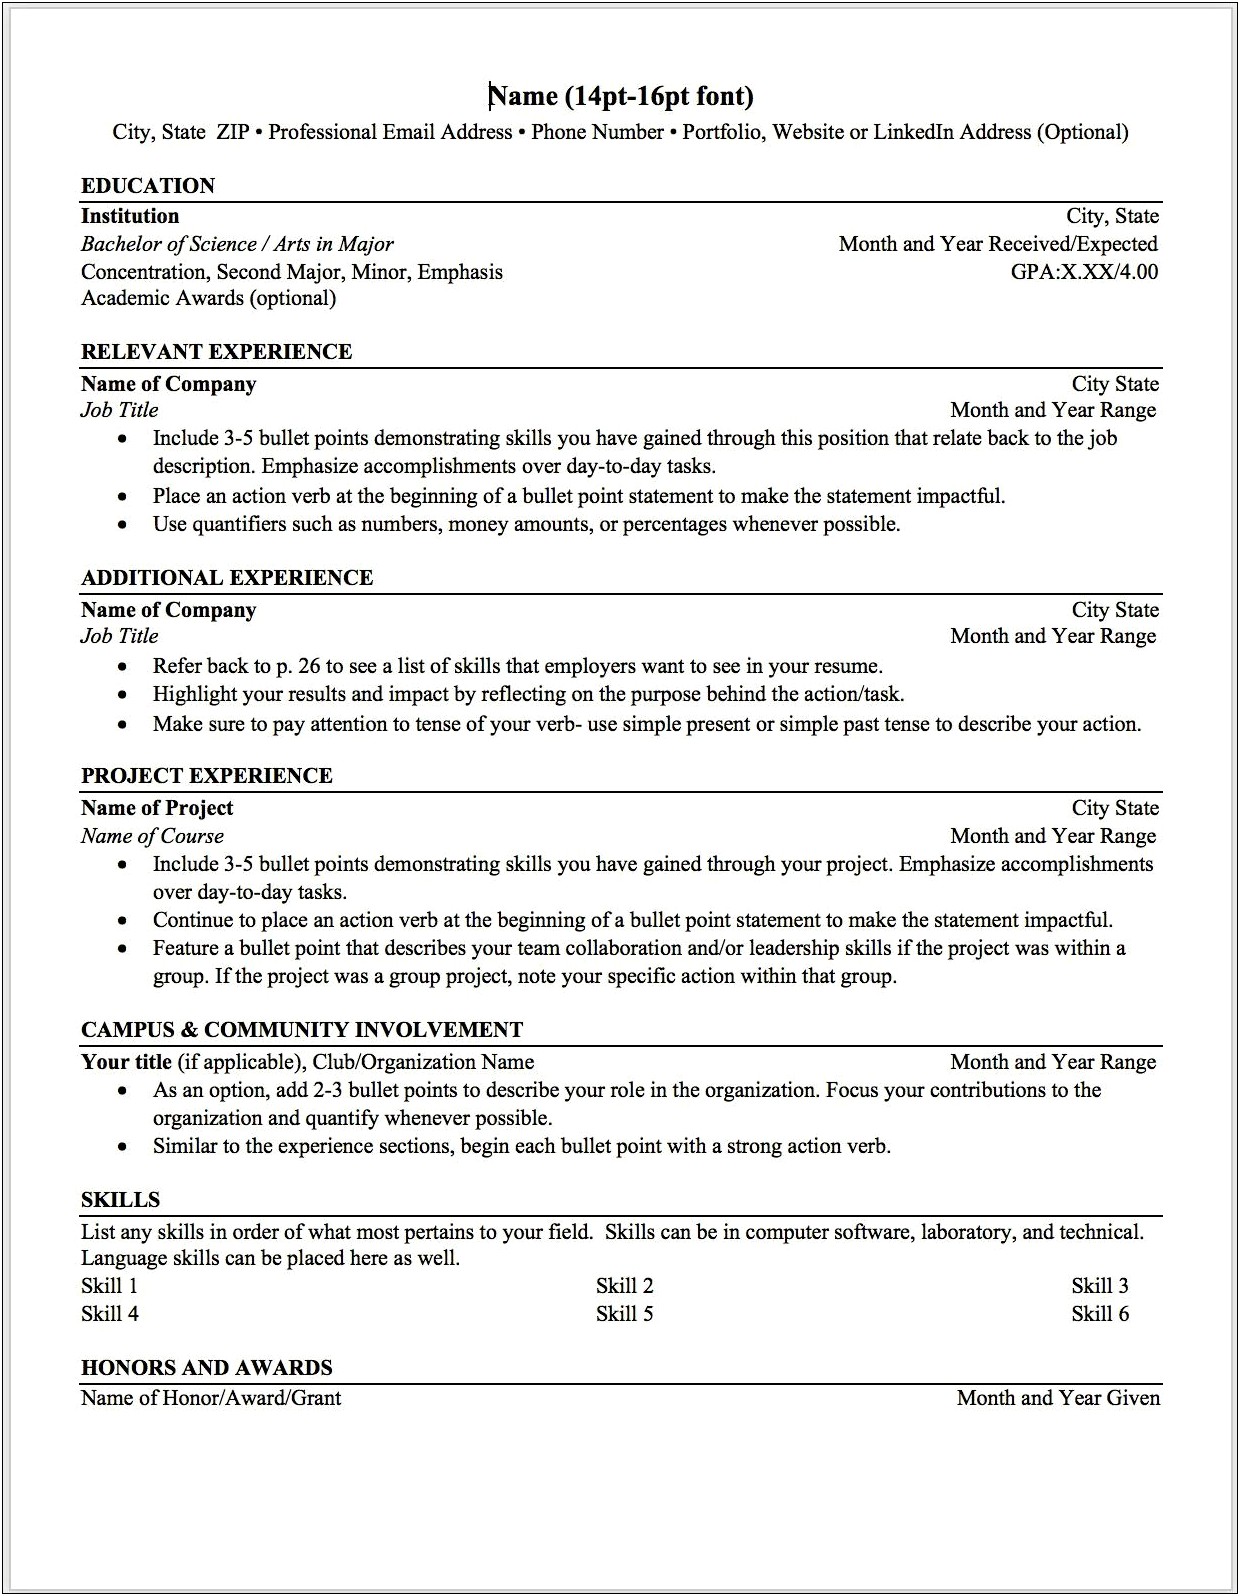 Diffrent Option To Put On Resume About Language